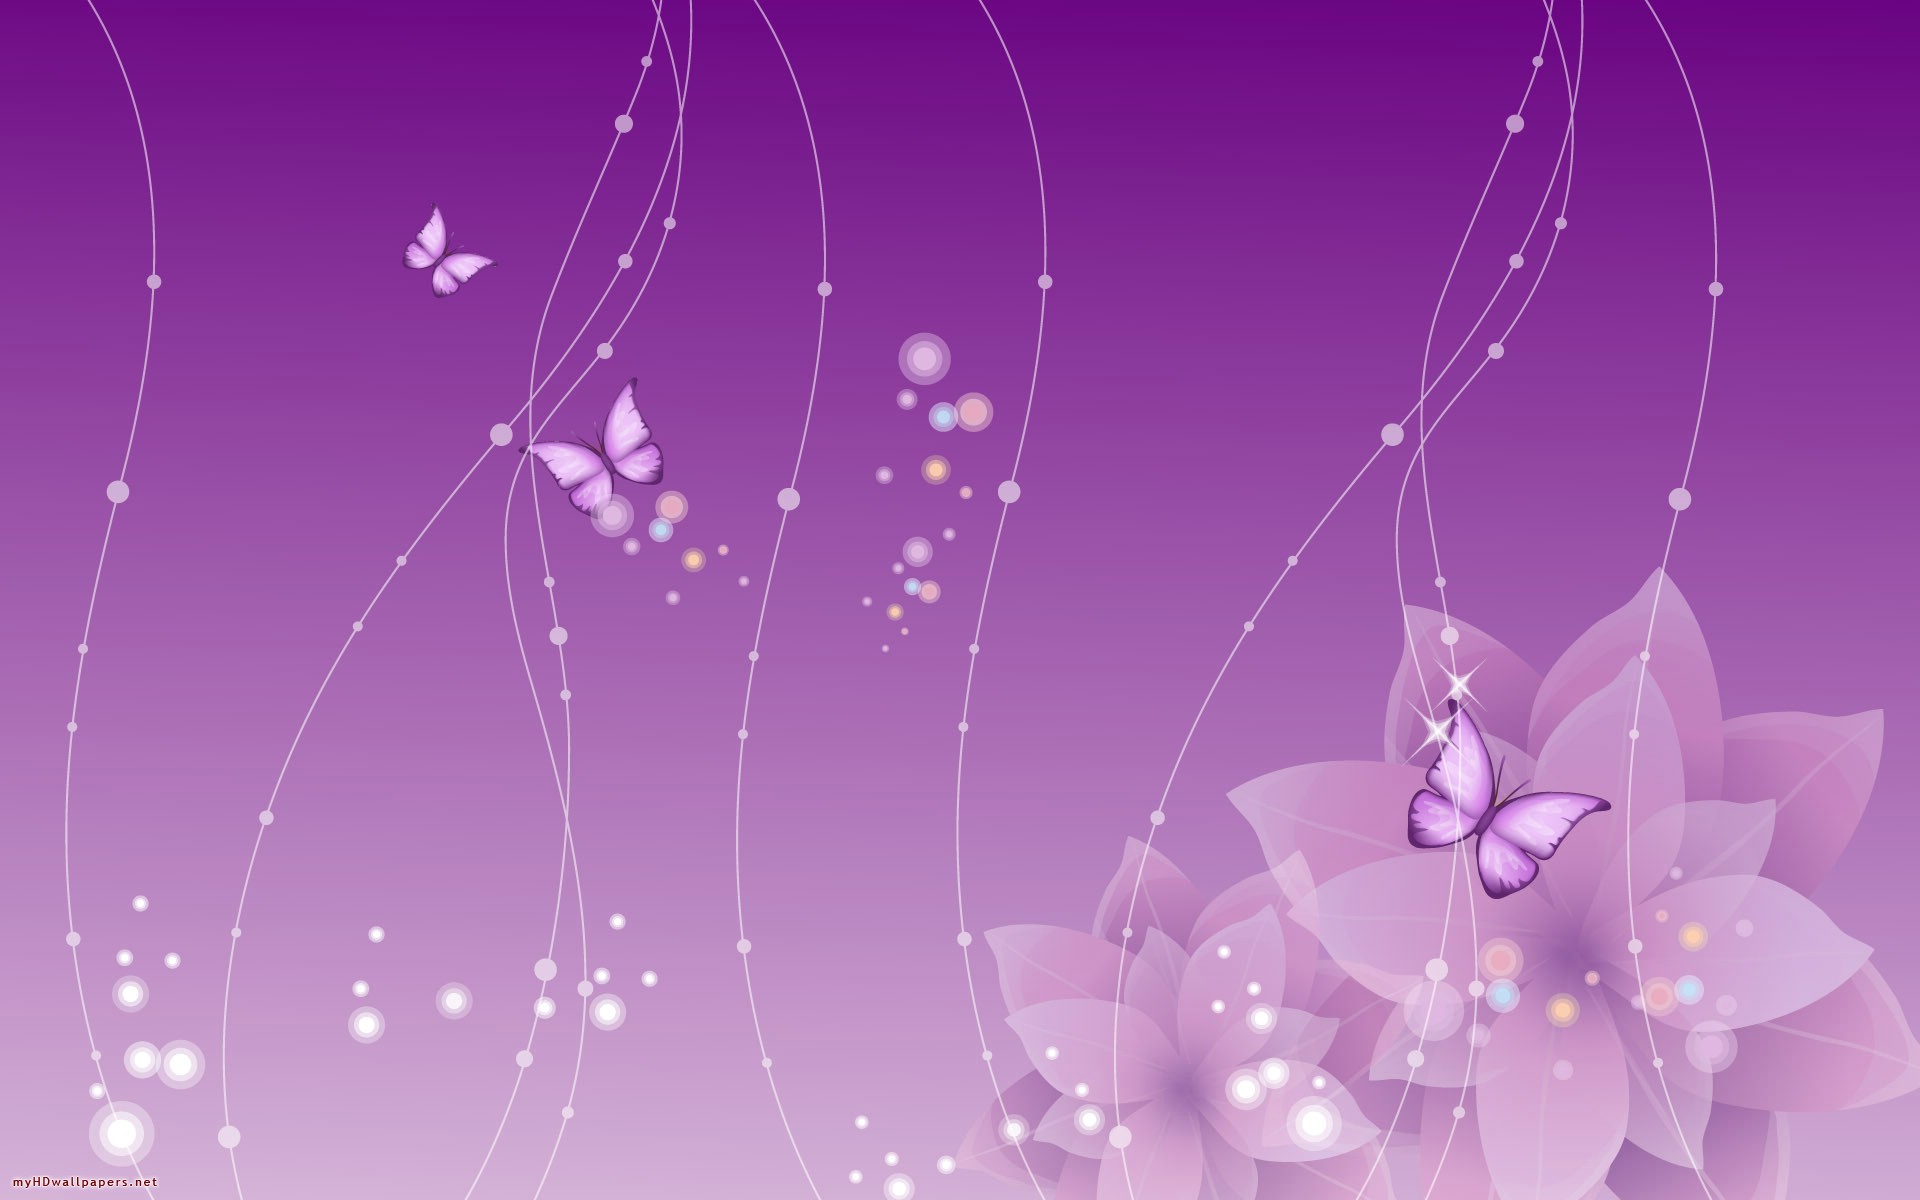 Wallpaper, Hd Wallpapers Download And New 3d Wallpapers - Light Purple  Color Background - 1920x1200 Wallpaper 